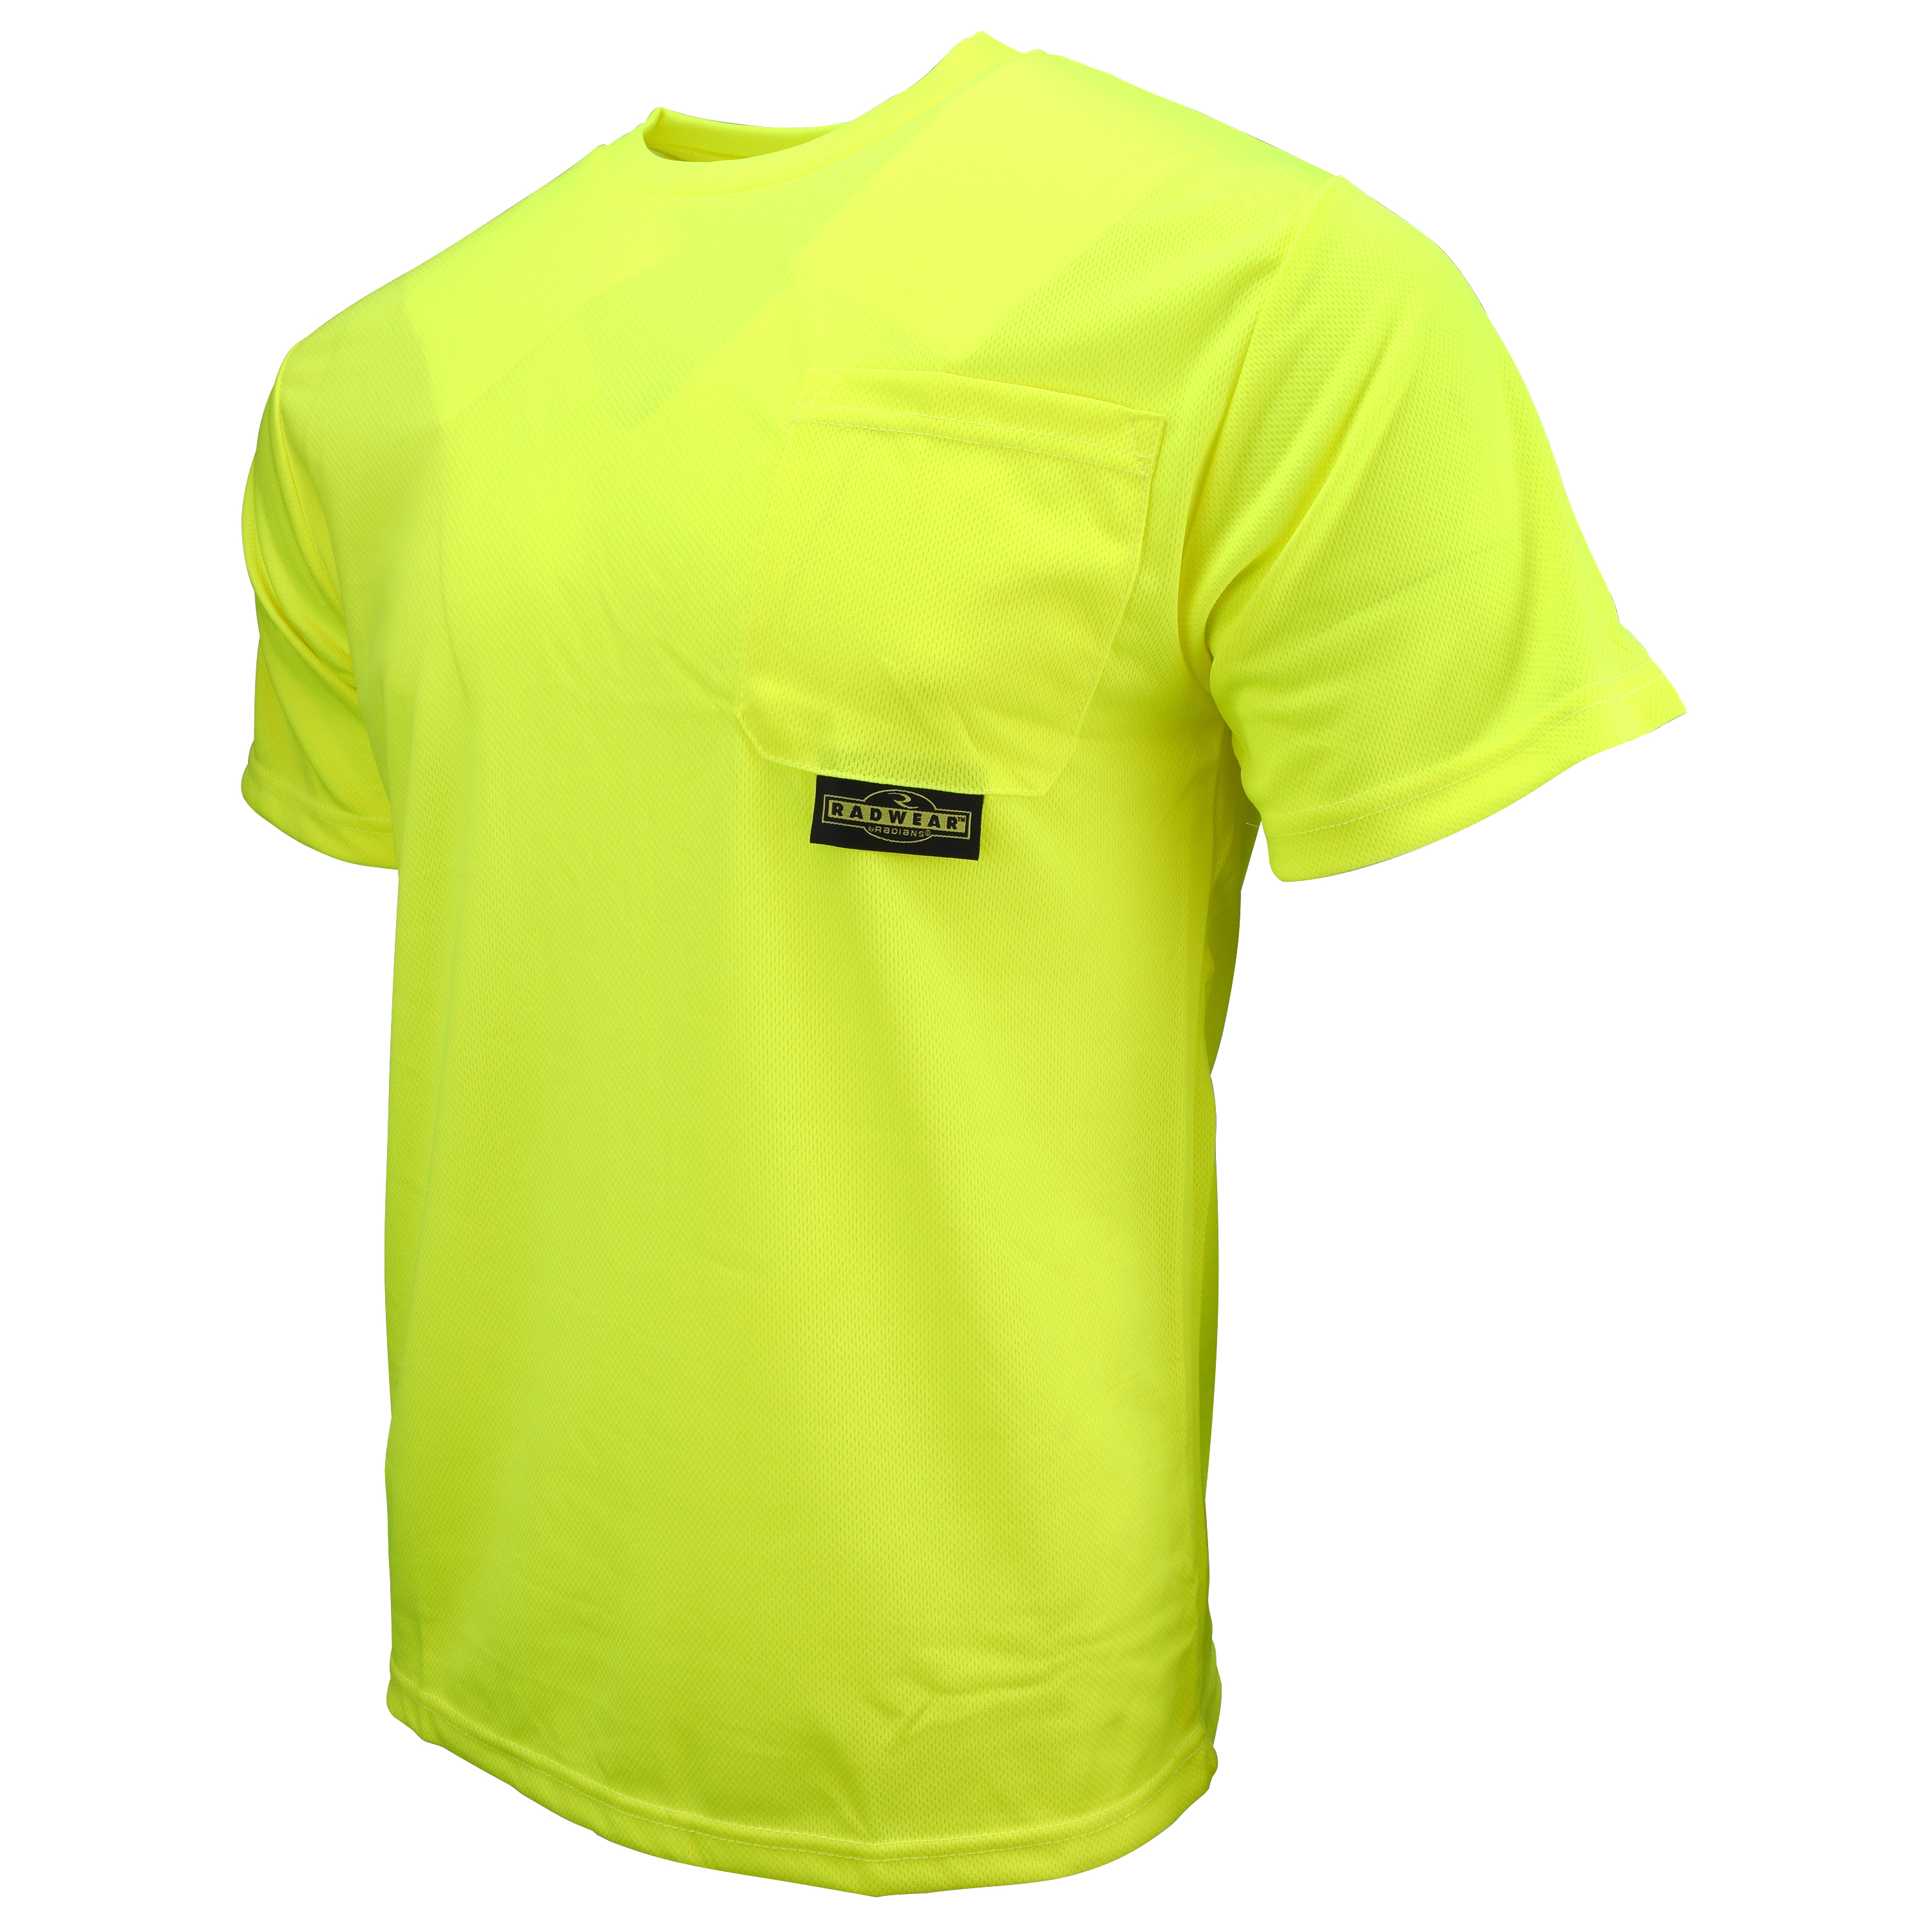 ST11-N Non-Rated Short Sleeve Safety T-Shirt with Max-Dri™ - Green - Size XL - Hi-Visibility